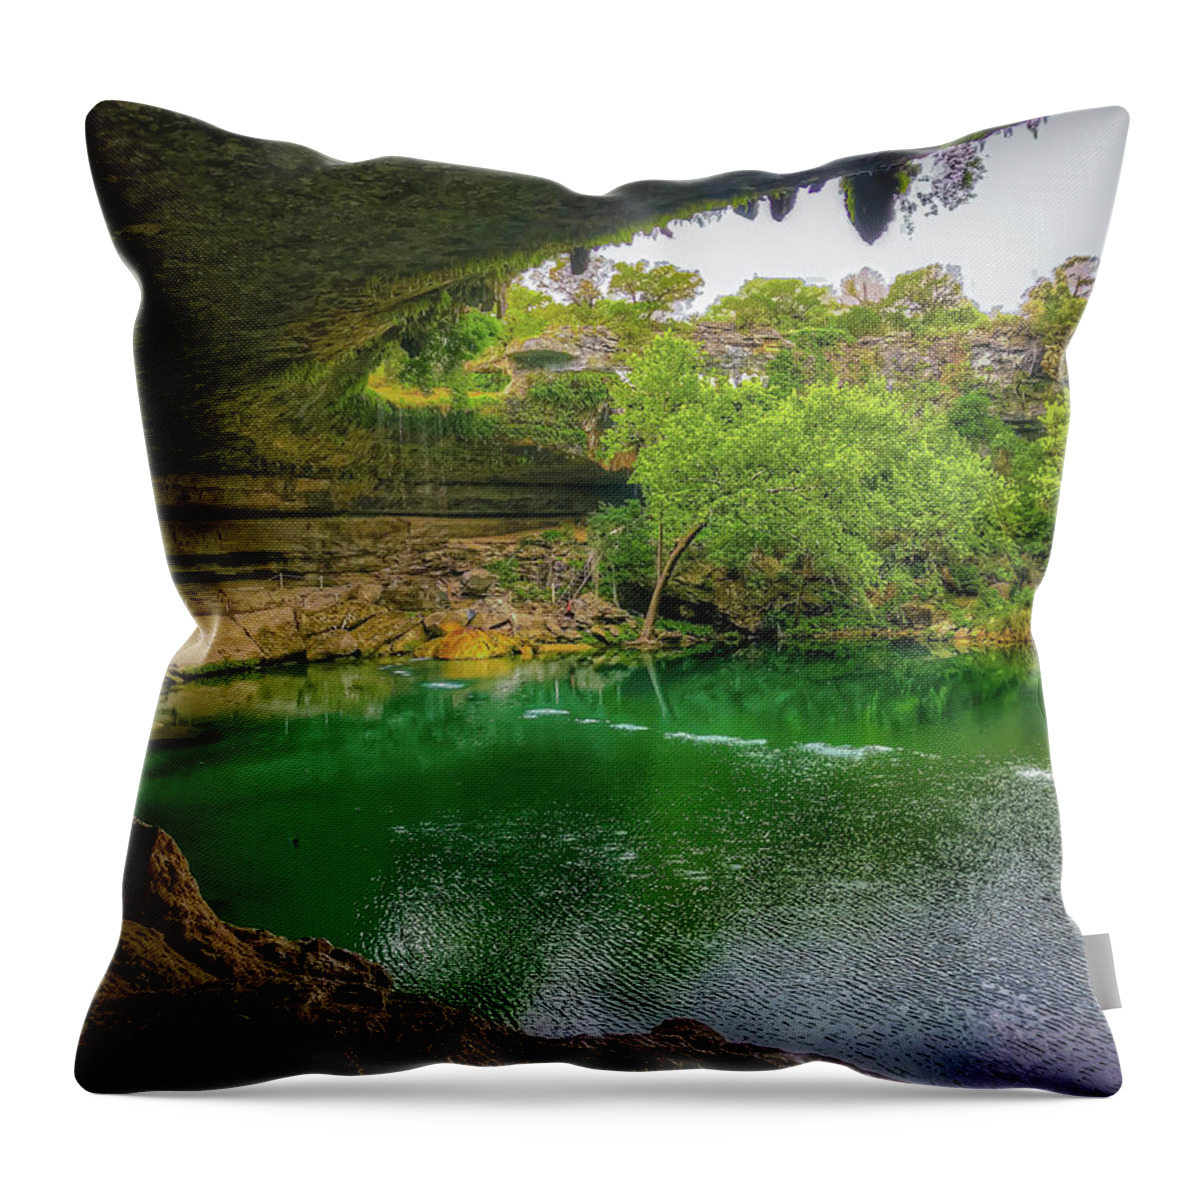 Hamiltonpool Throw Pillow featuring the photograph Hamilton Pool Cave by Pam Rendall